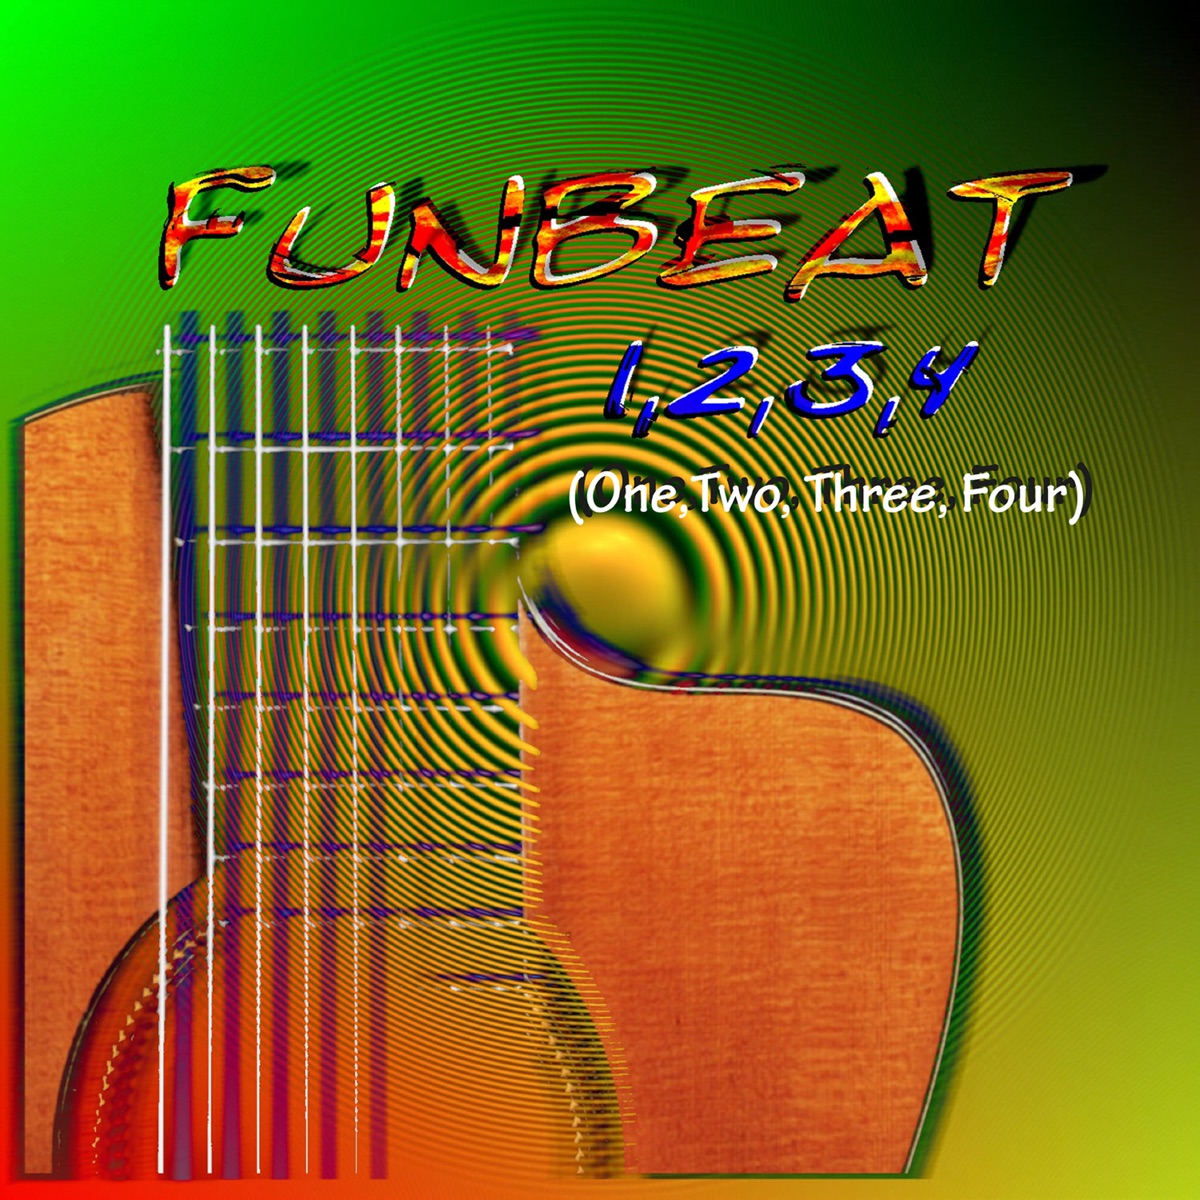 1, 2, 3, 4 (One, Two, Three, Four) - EP by Funbeat on Apple Music